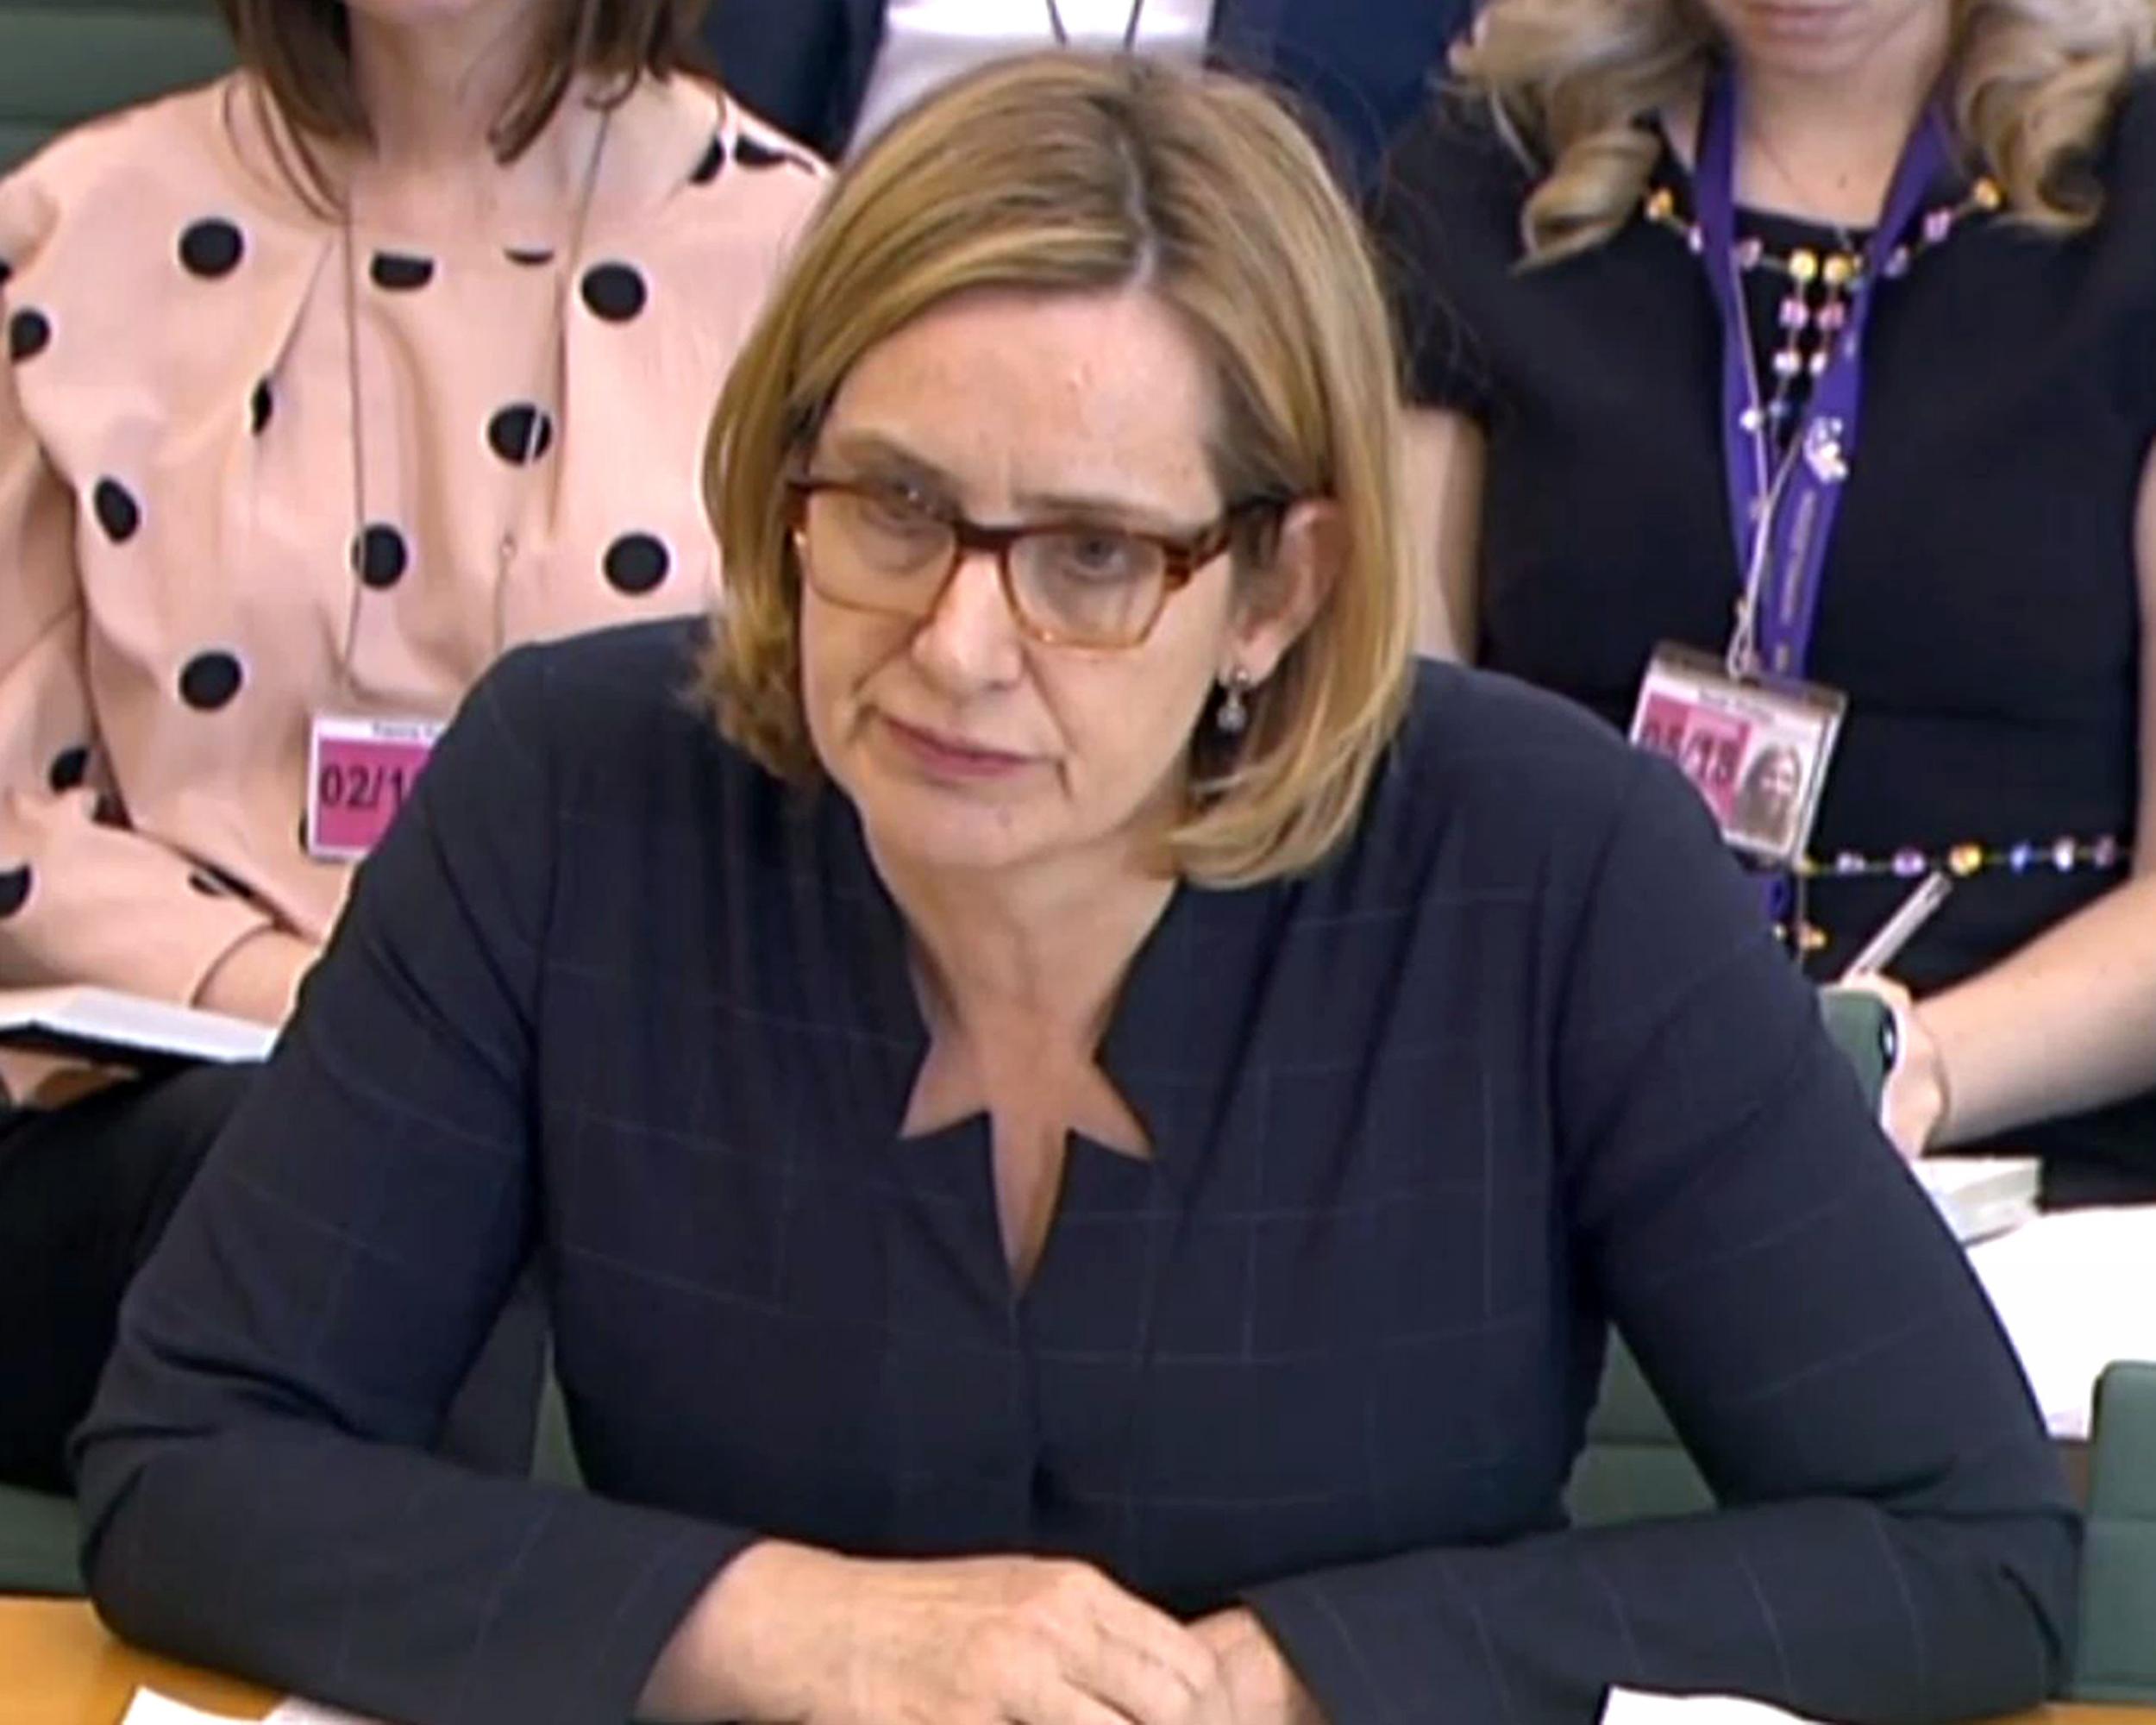 Amber Rudd has admitted that some immigration officers do use targets